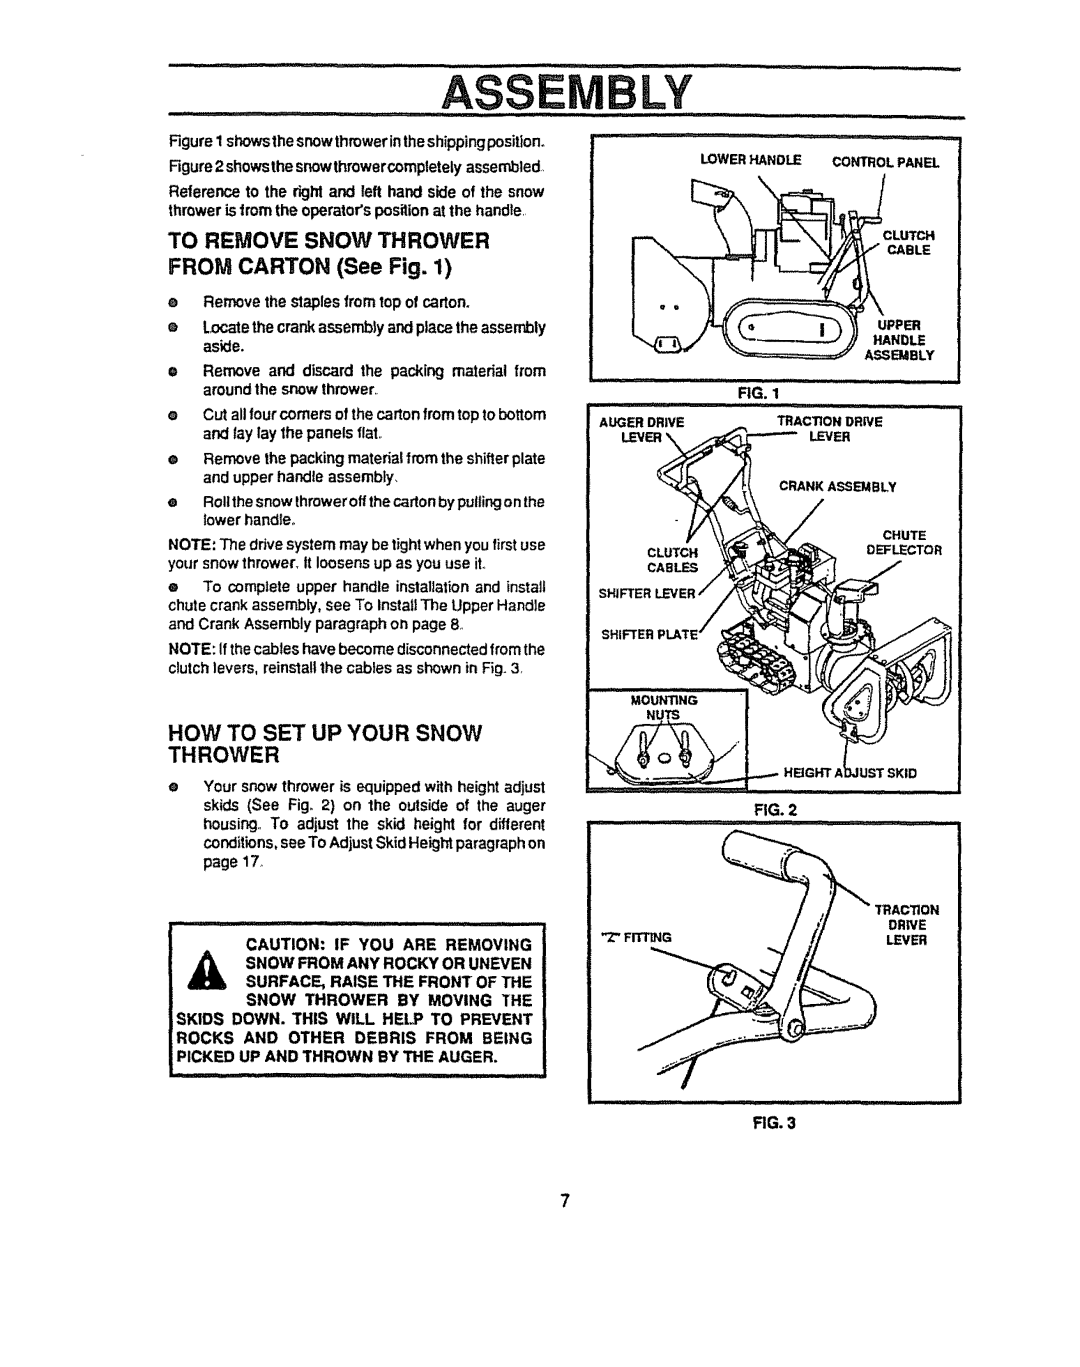 Sears 536.884821 manual Asse, FROM CARTON See Fig, To Remove Snow Thrower, How To Set Up Your Snow Thrower 